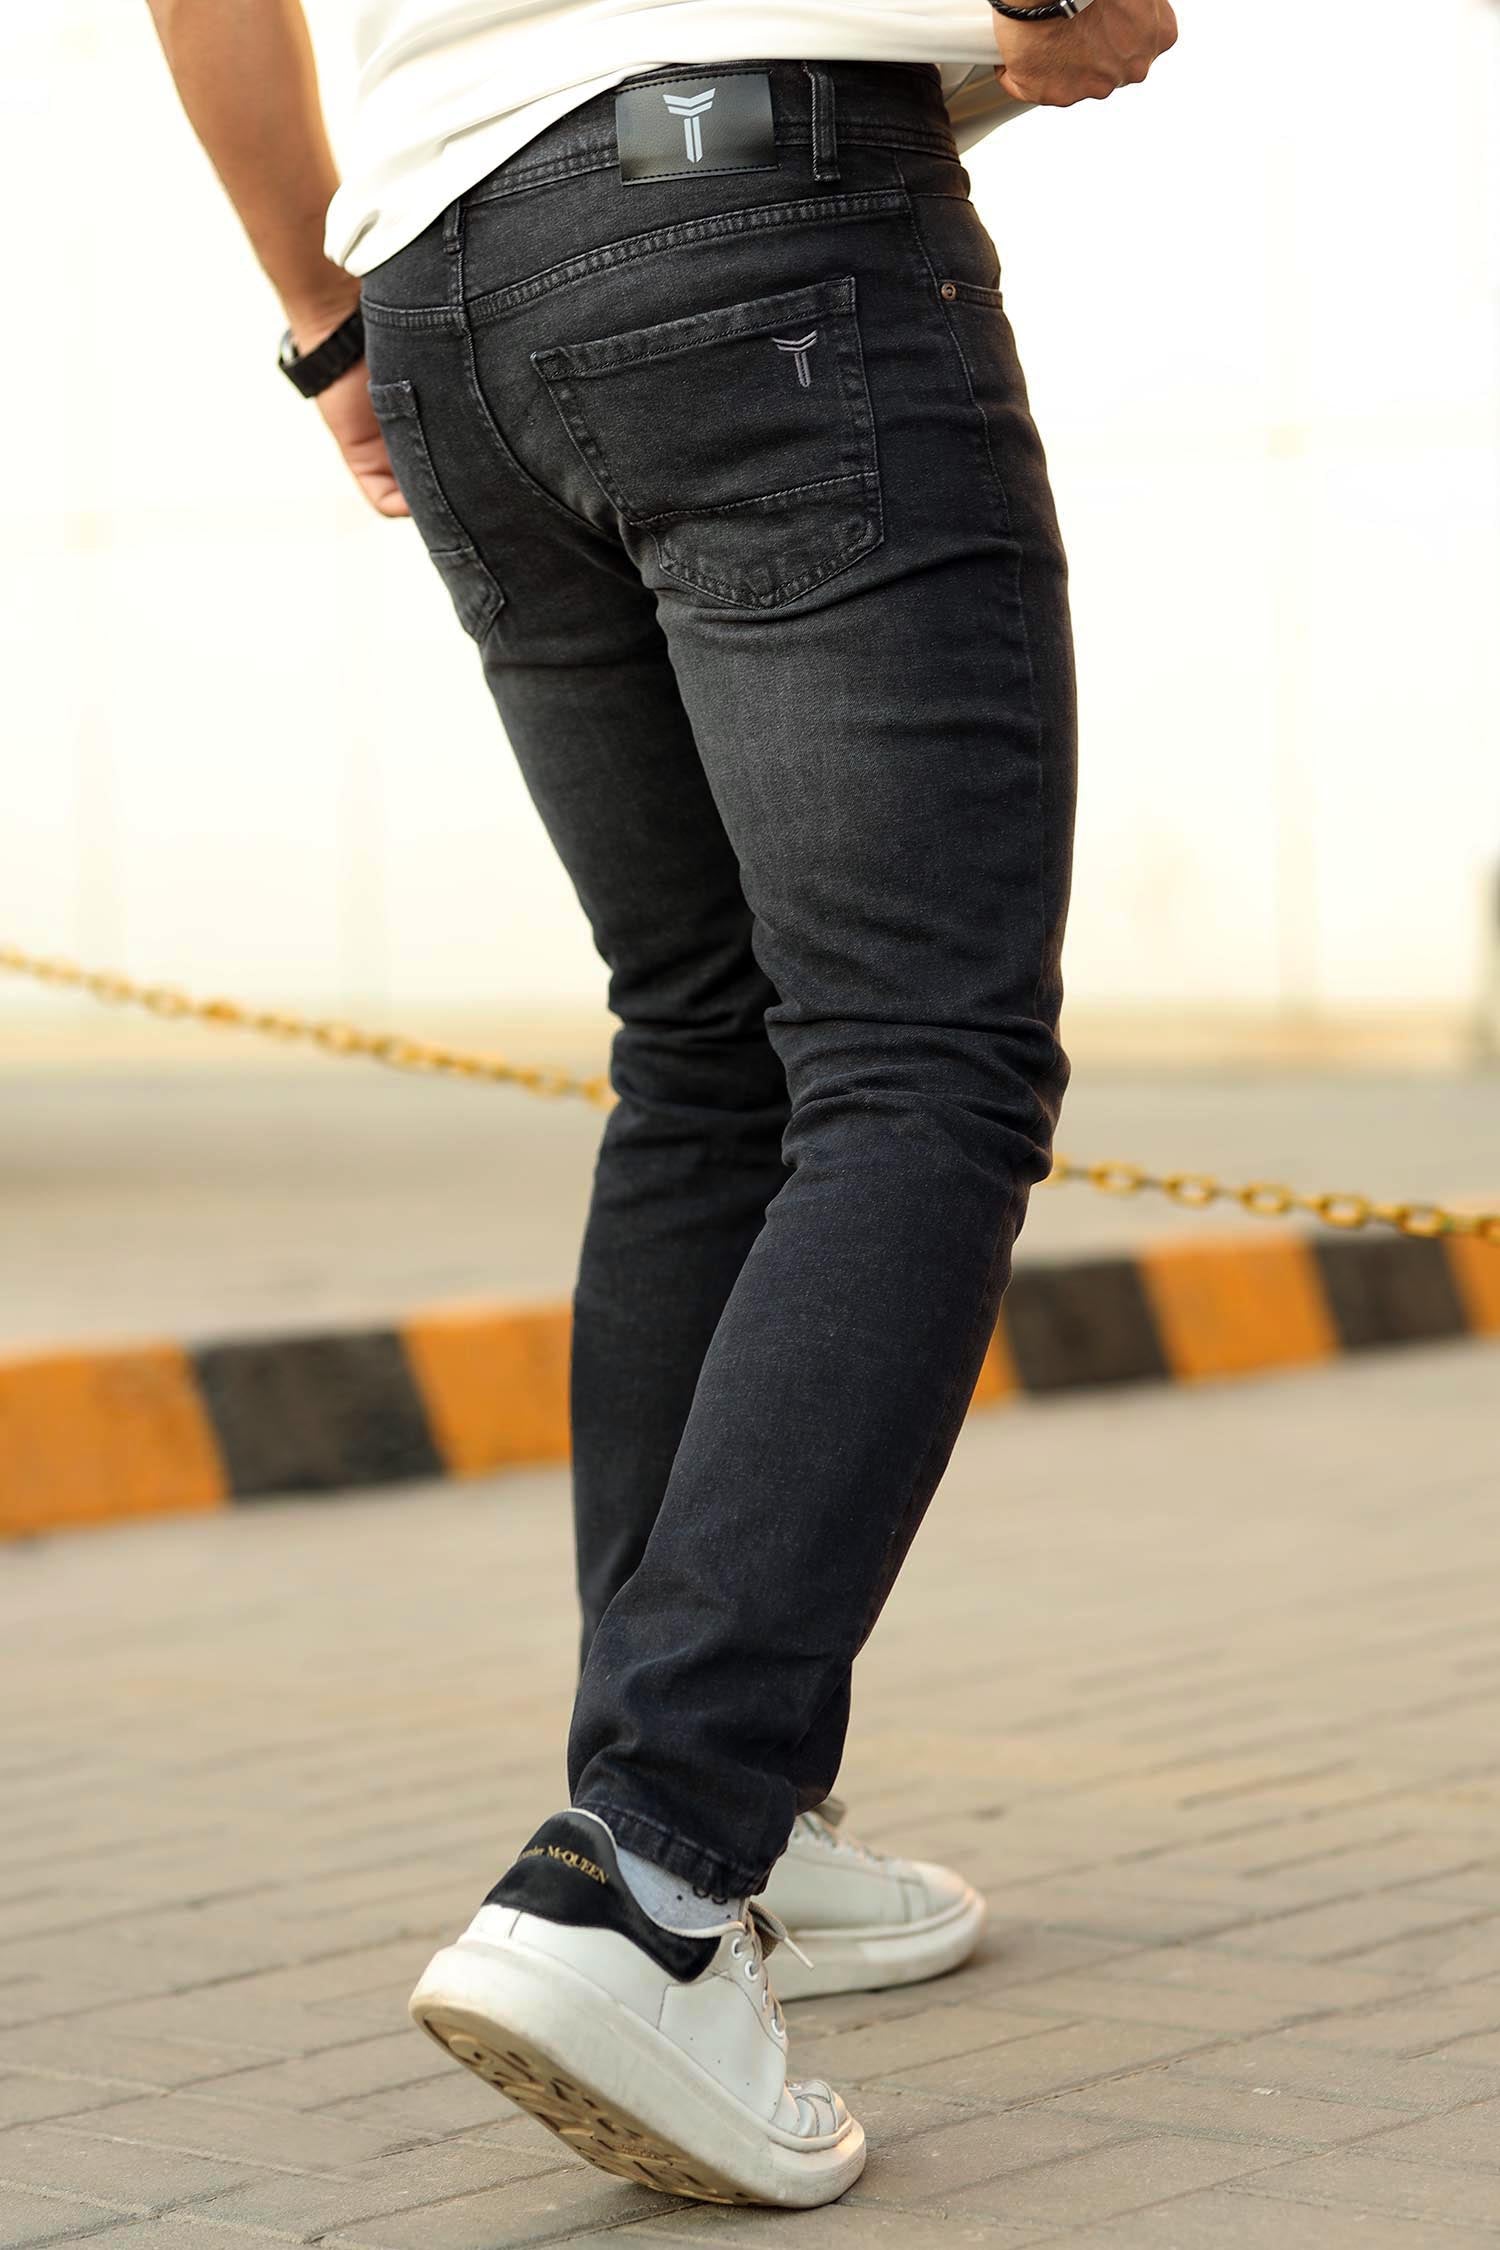 Turbo Slim Fit Jeans In Charcoal